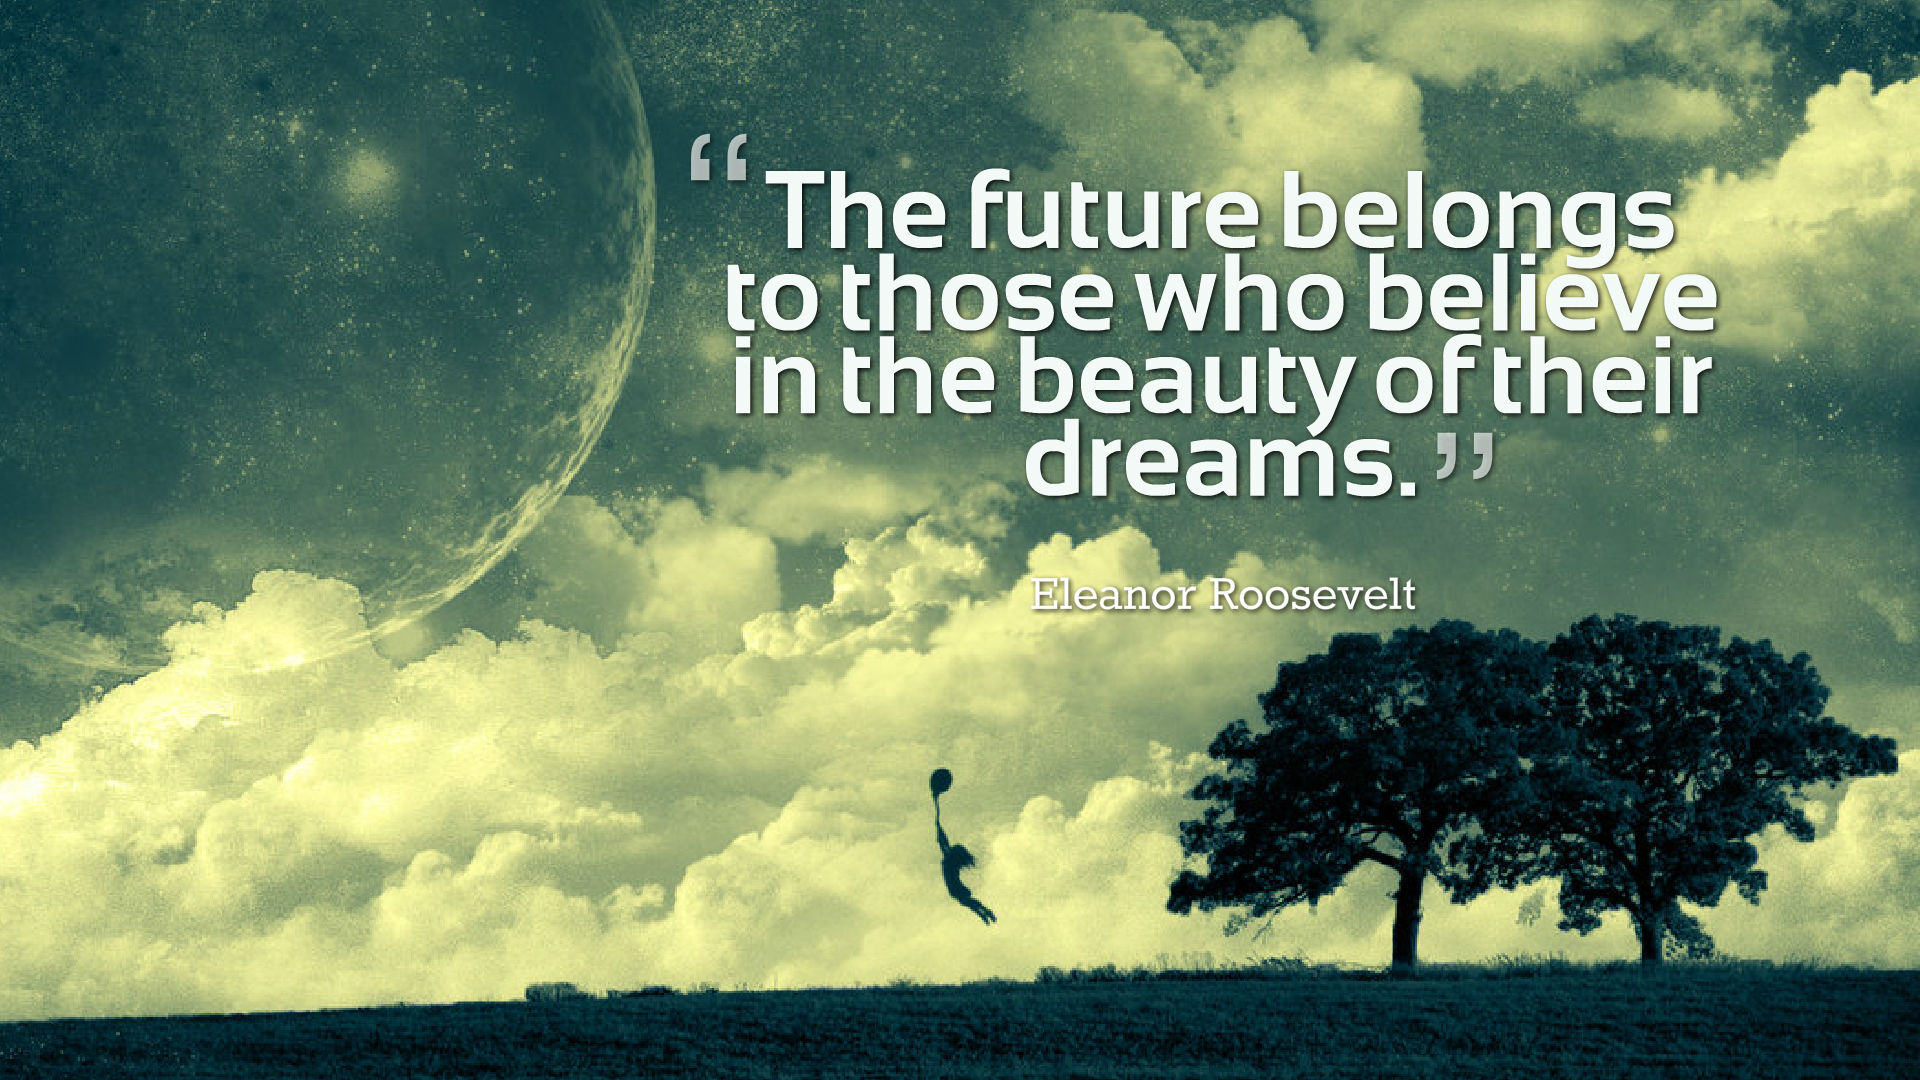 Dreams Quotes Wallpaper Hd - Future Belongs To Those Who Believe - HD Wallpaper 